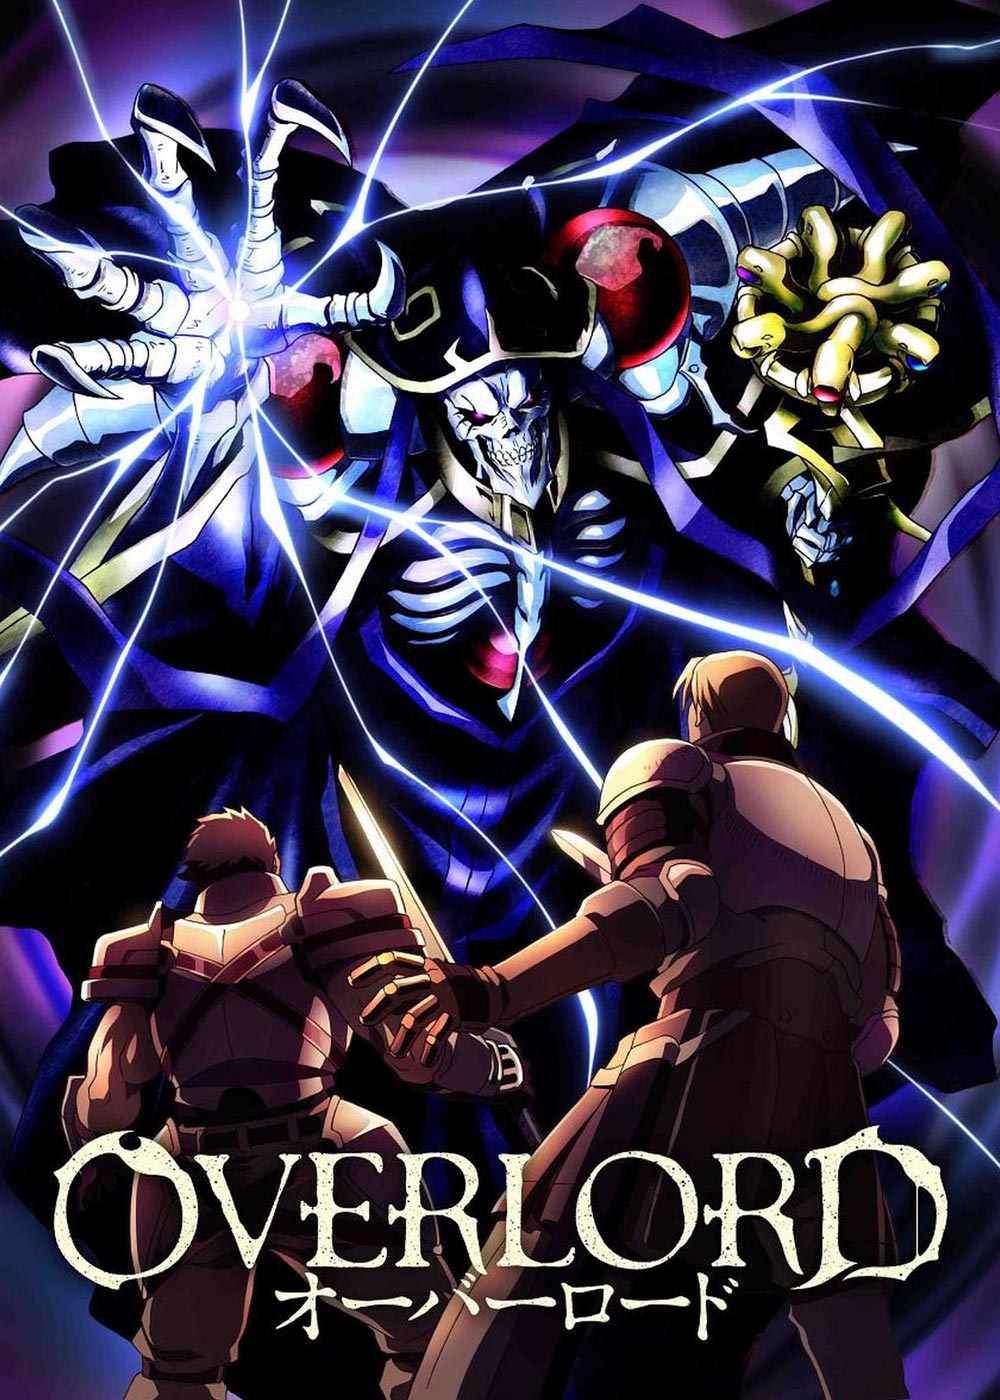 Overlord IV Ep. 1  Sorcerer Kingdom Ains Ooal Gown: Ains Ooal Gown Nation  of Leading Darkness 